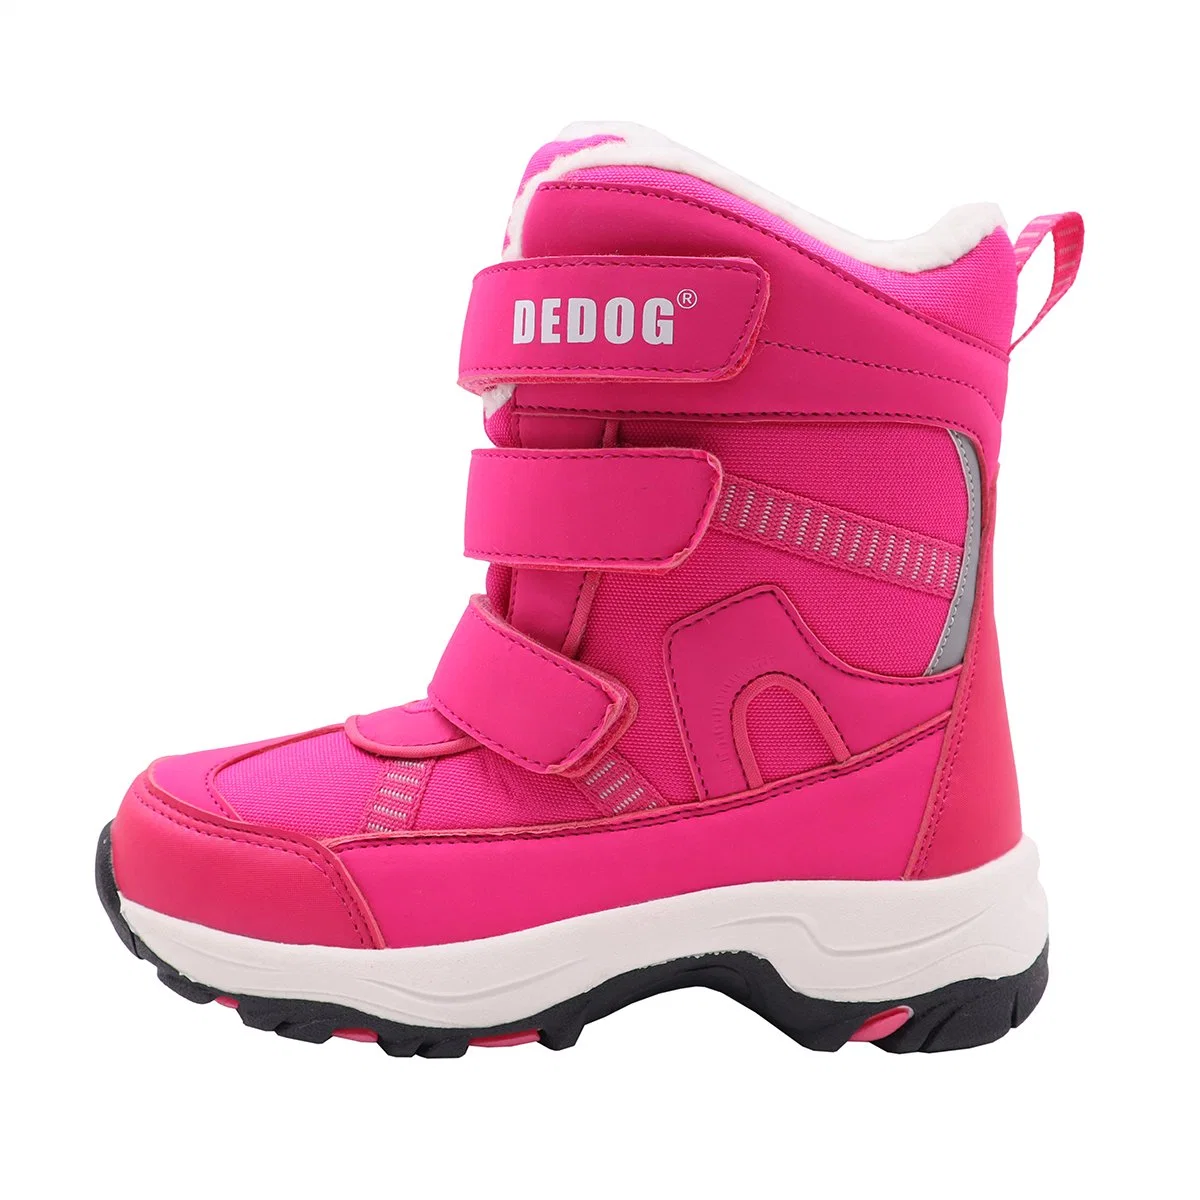 Snow Boots Winter Waterproof Antiskid Boots Hiking Outdoor Shoes for Children